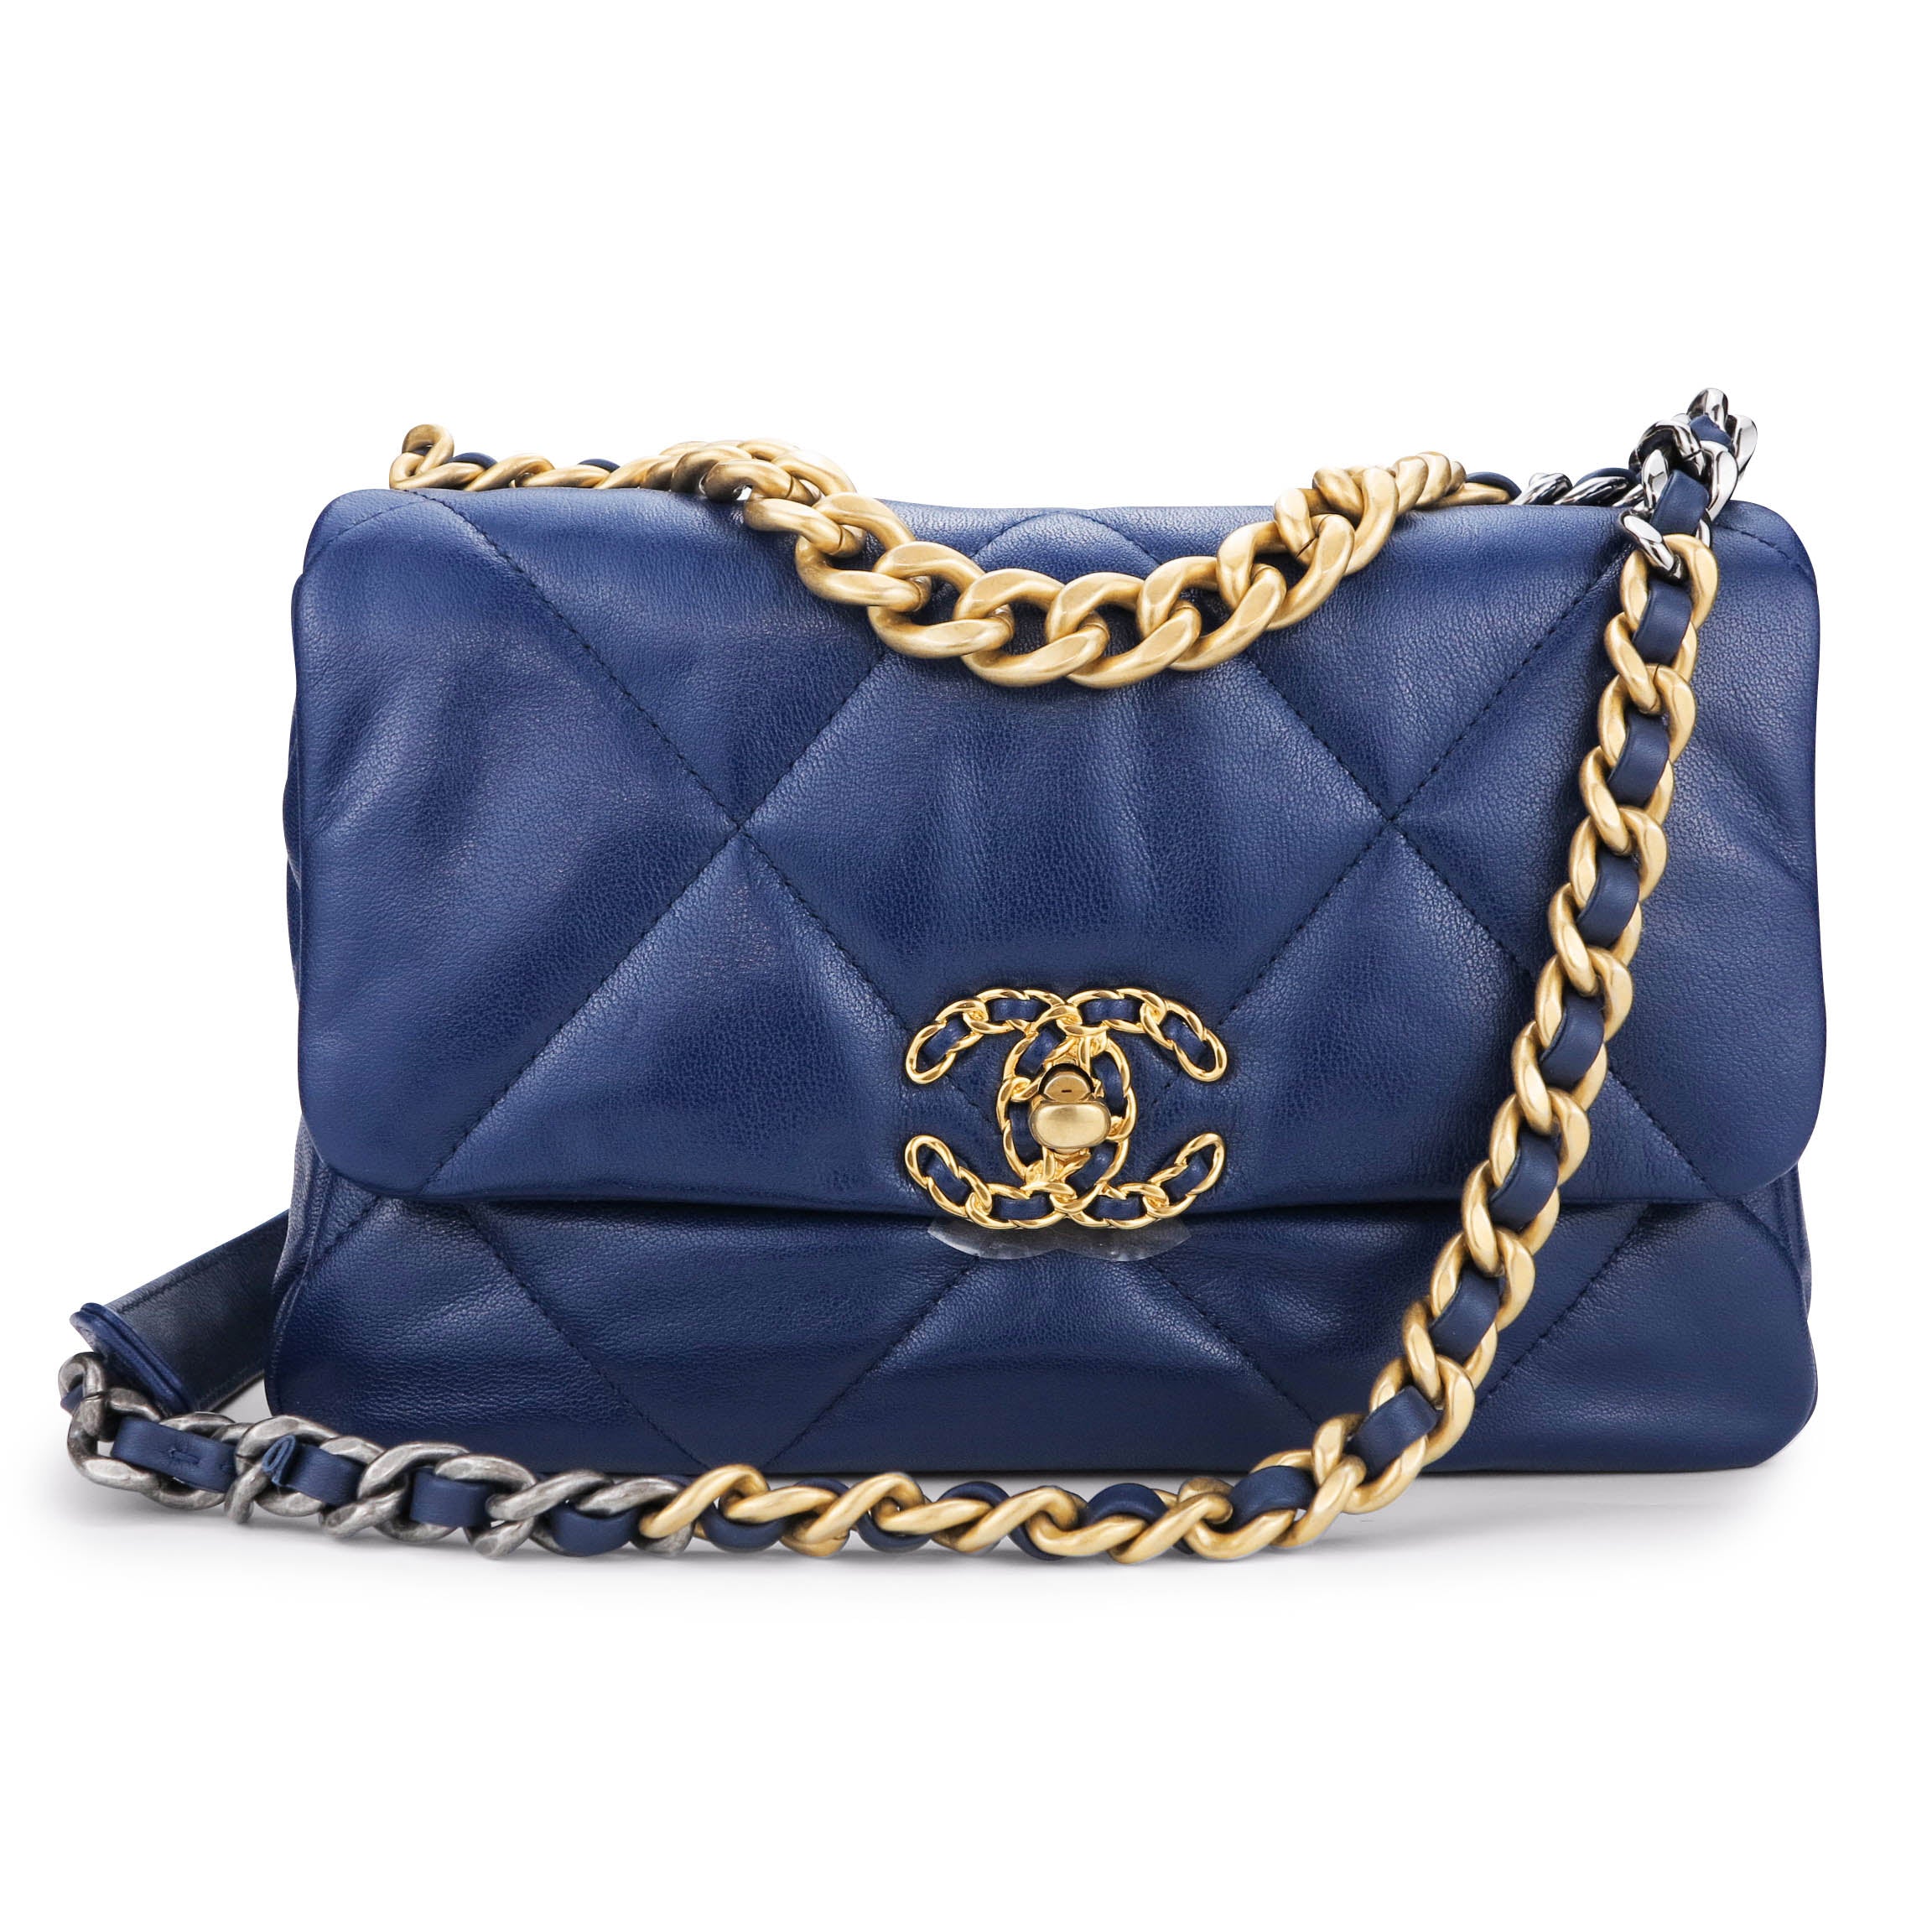 Chanel 19 leather handbag Chanel Navy in Leather - 21979220